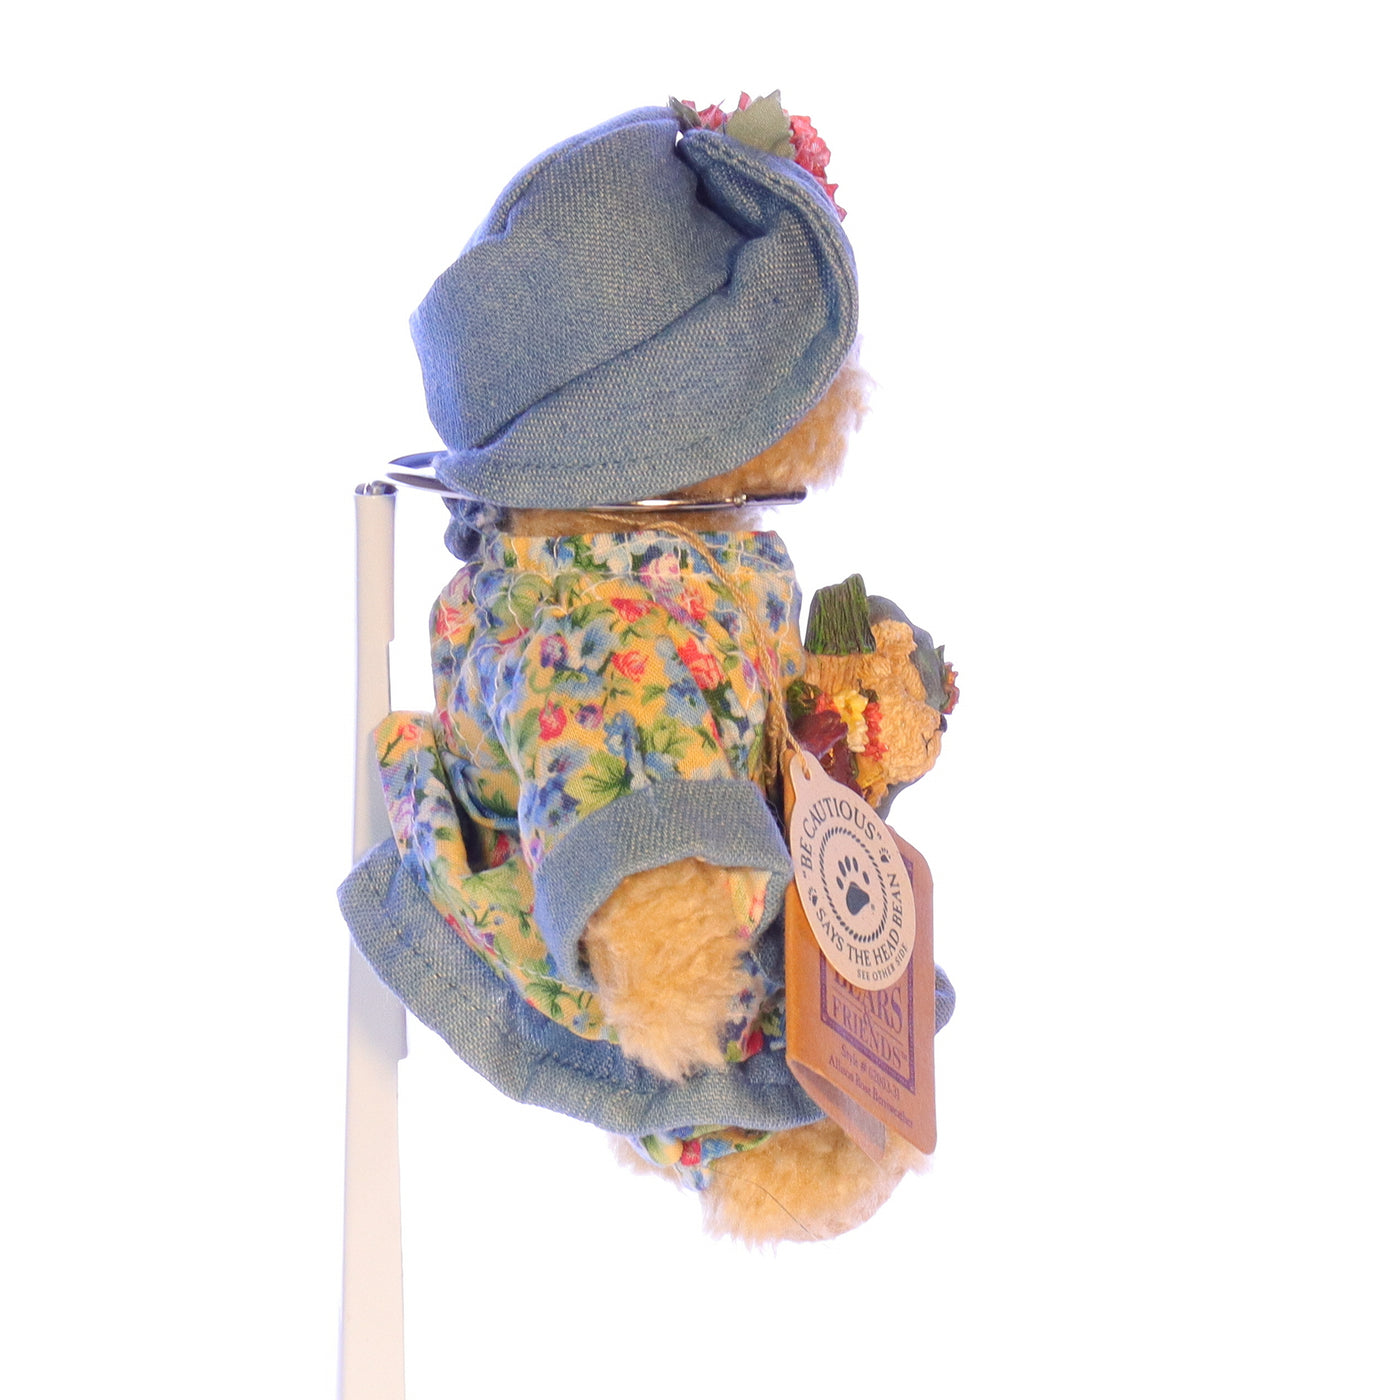 Boyds_Bears_and_Friends_02003-31_Allison_Rose_Berriweather_Stuffed_Animal_1988 Right View